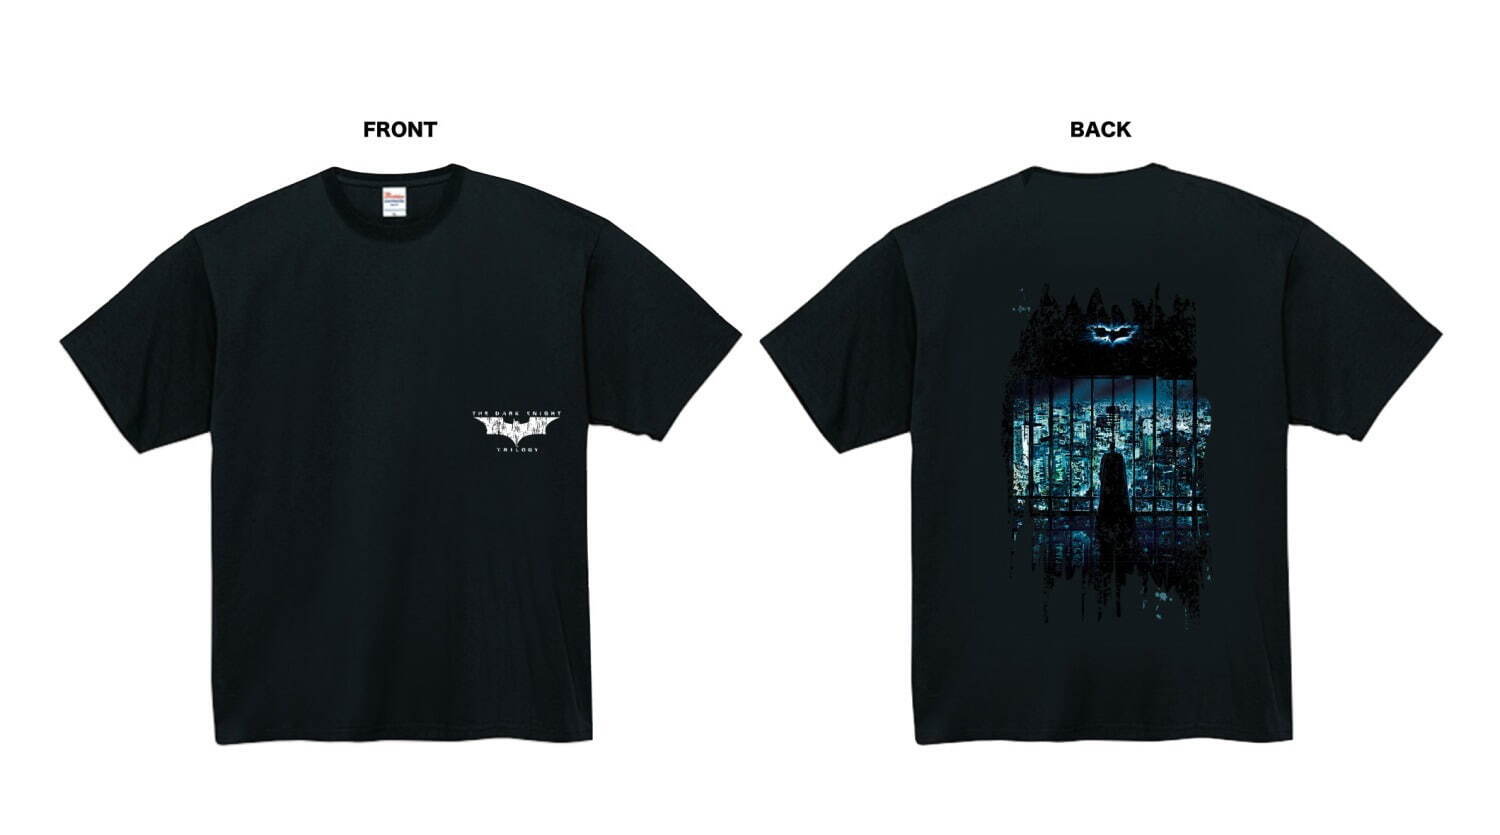 Tシャツ 5,500円
THE DARK KNIGHT TRILOGY and all related characters and elements © & TM DC & WBEI. (s23)